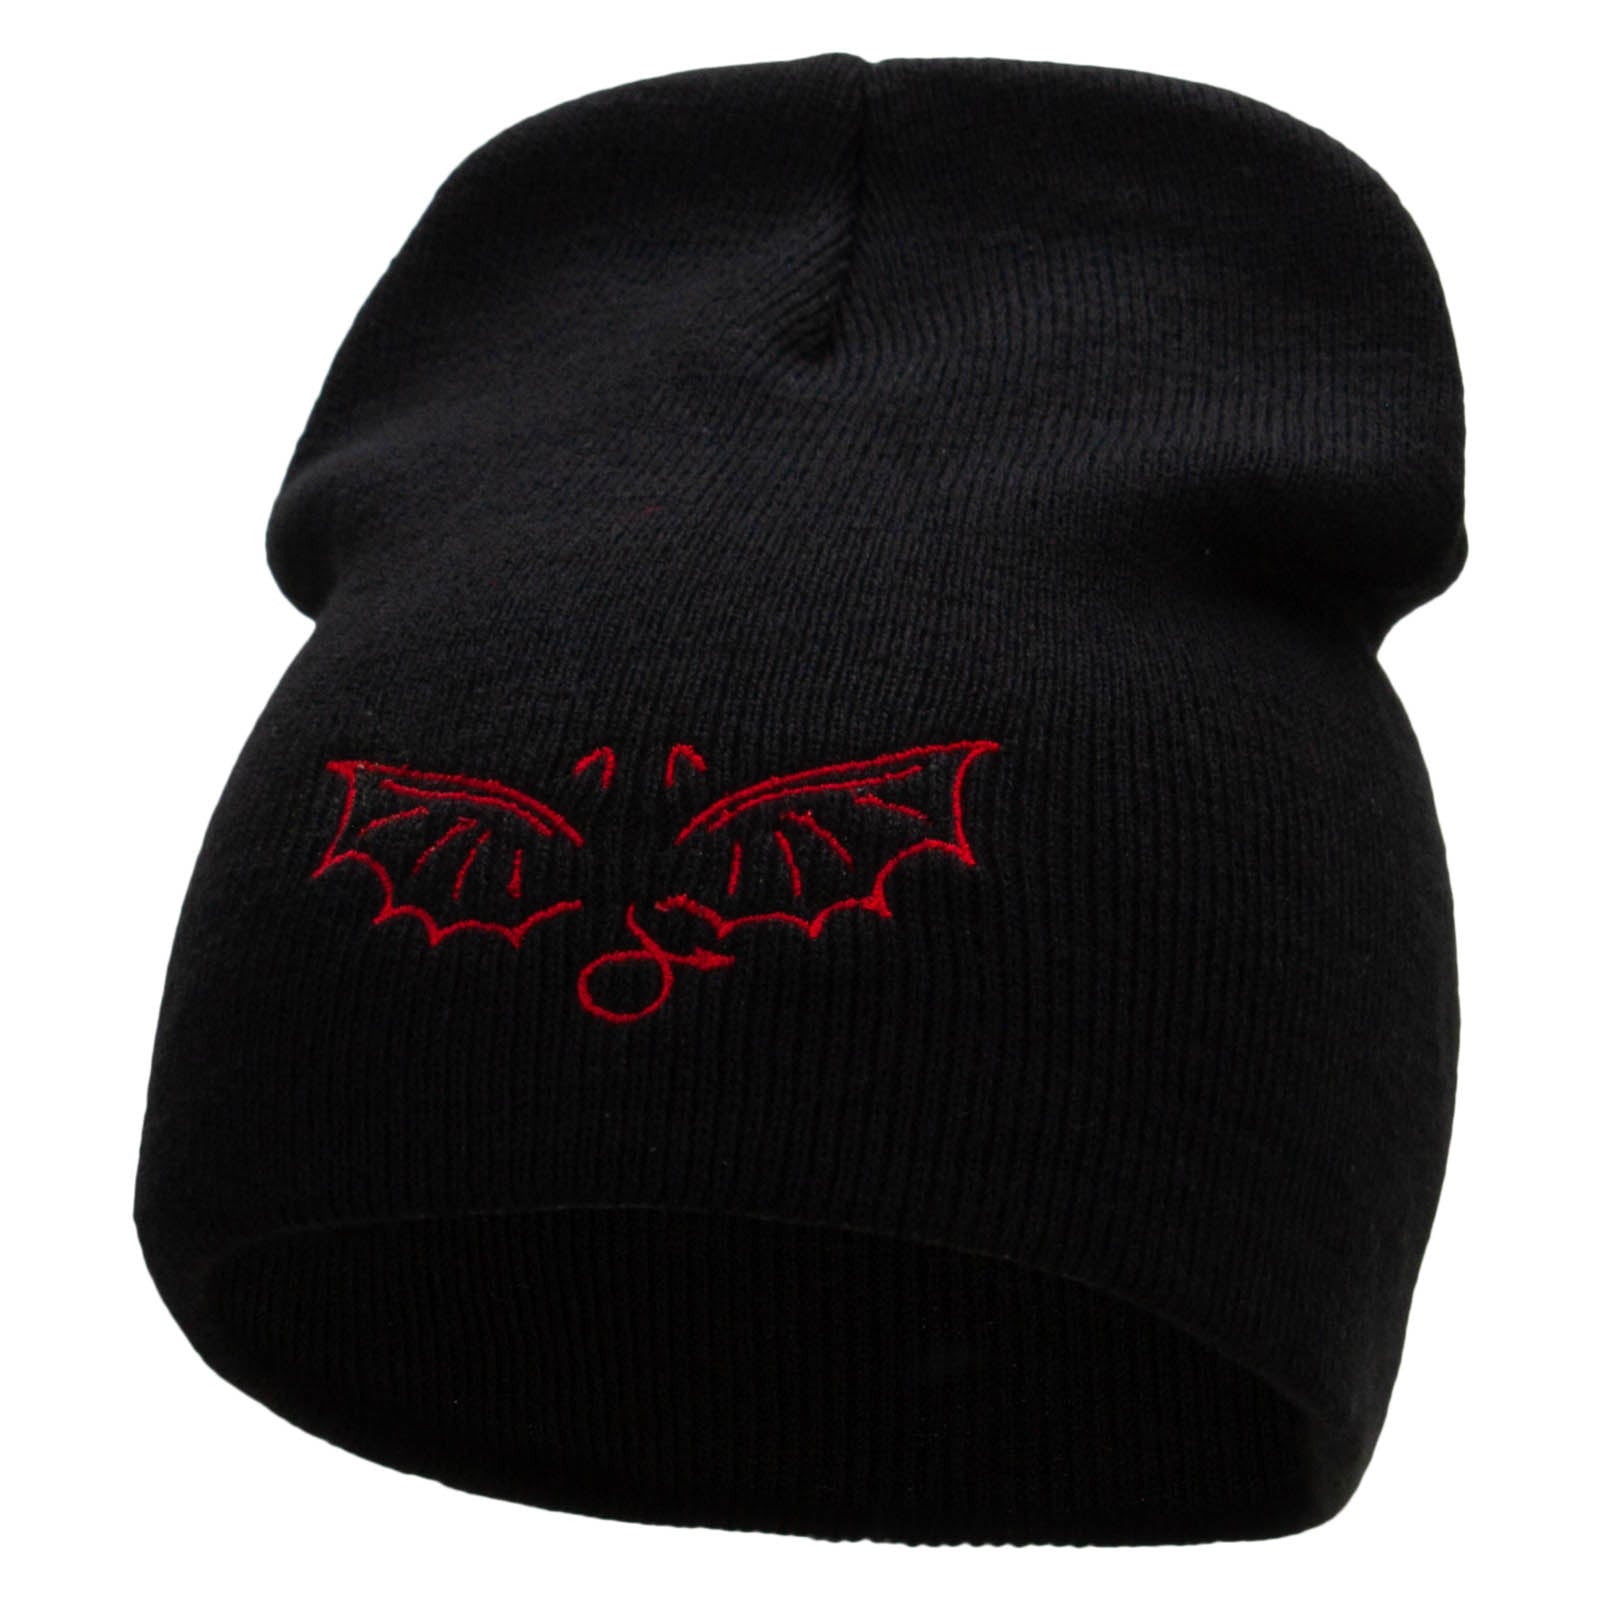 Devil Wings Embroidered 8 inch Acrylic Short Blank Beanie - Black OSFM